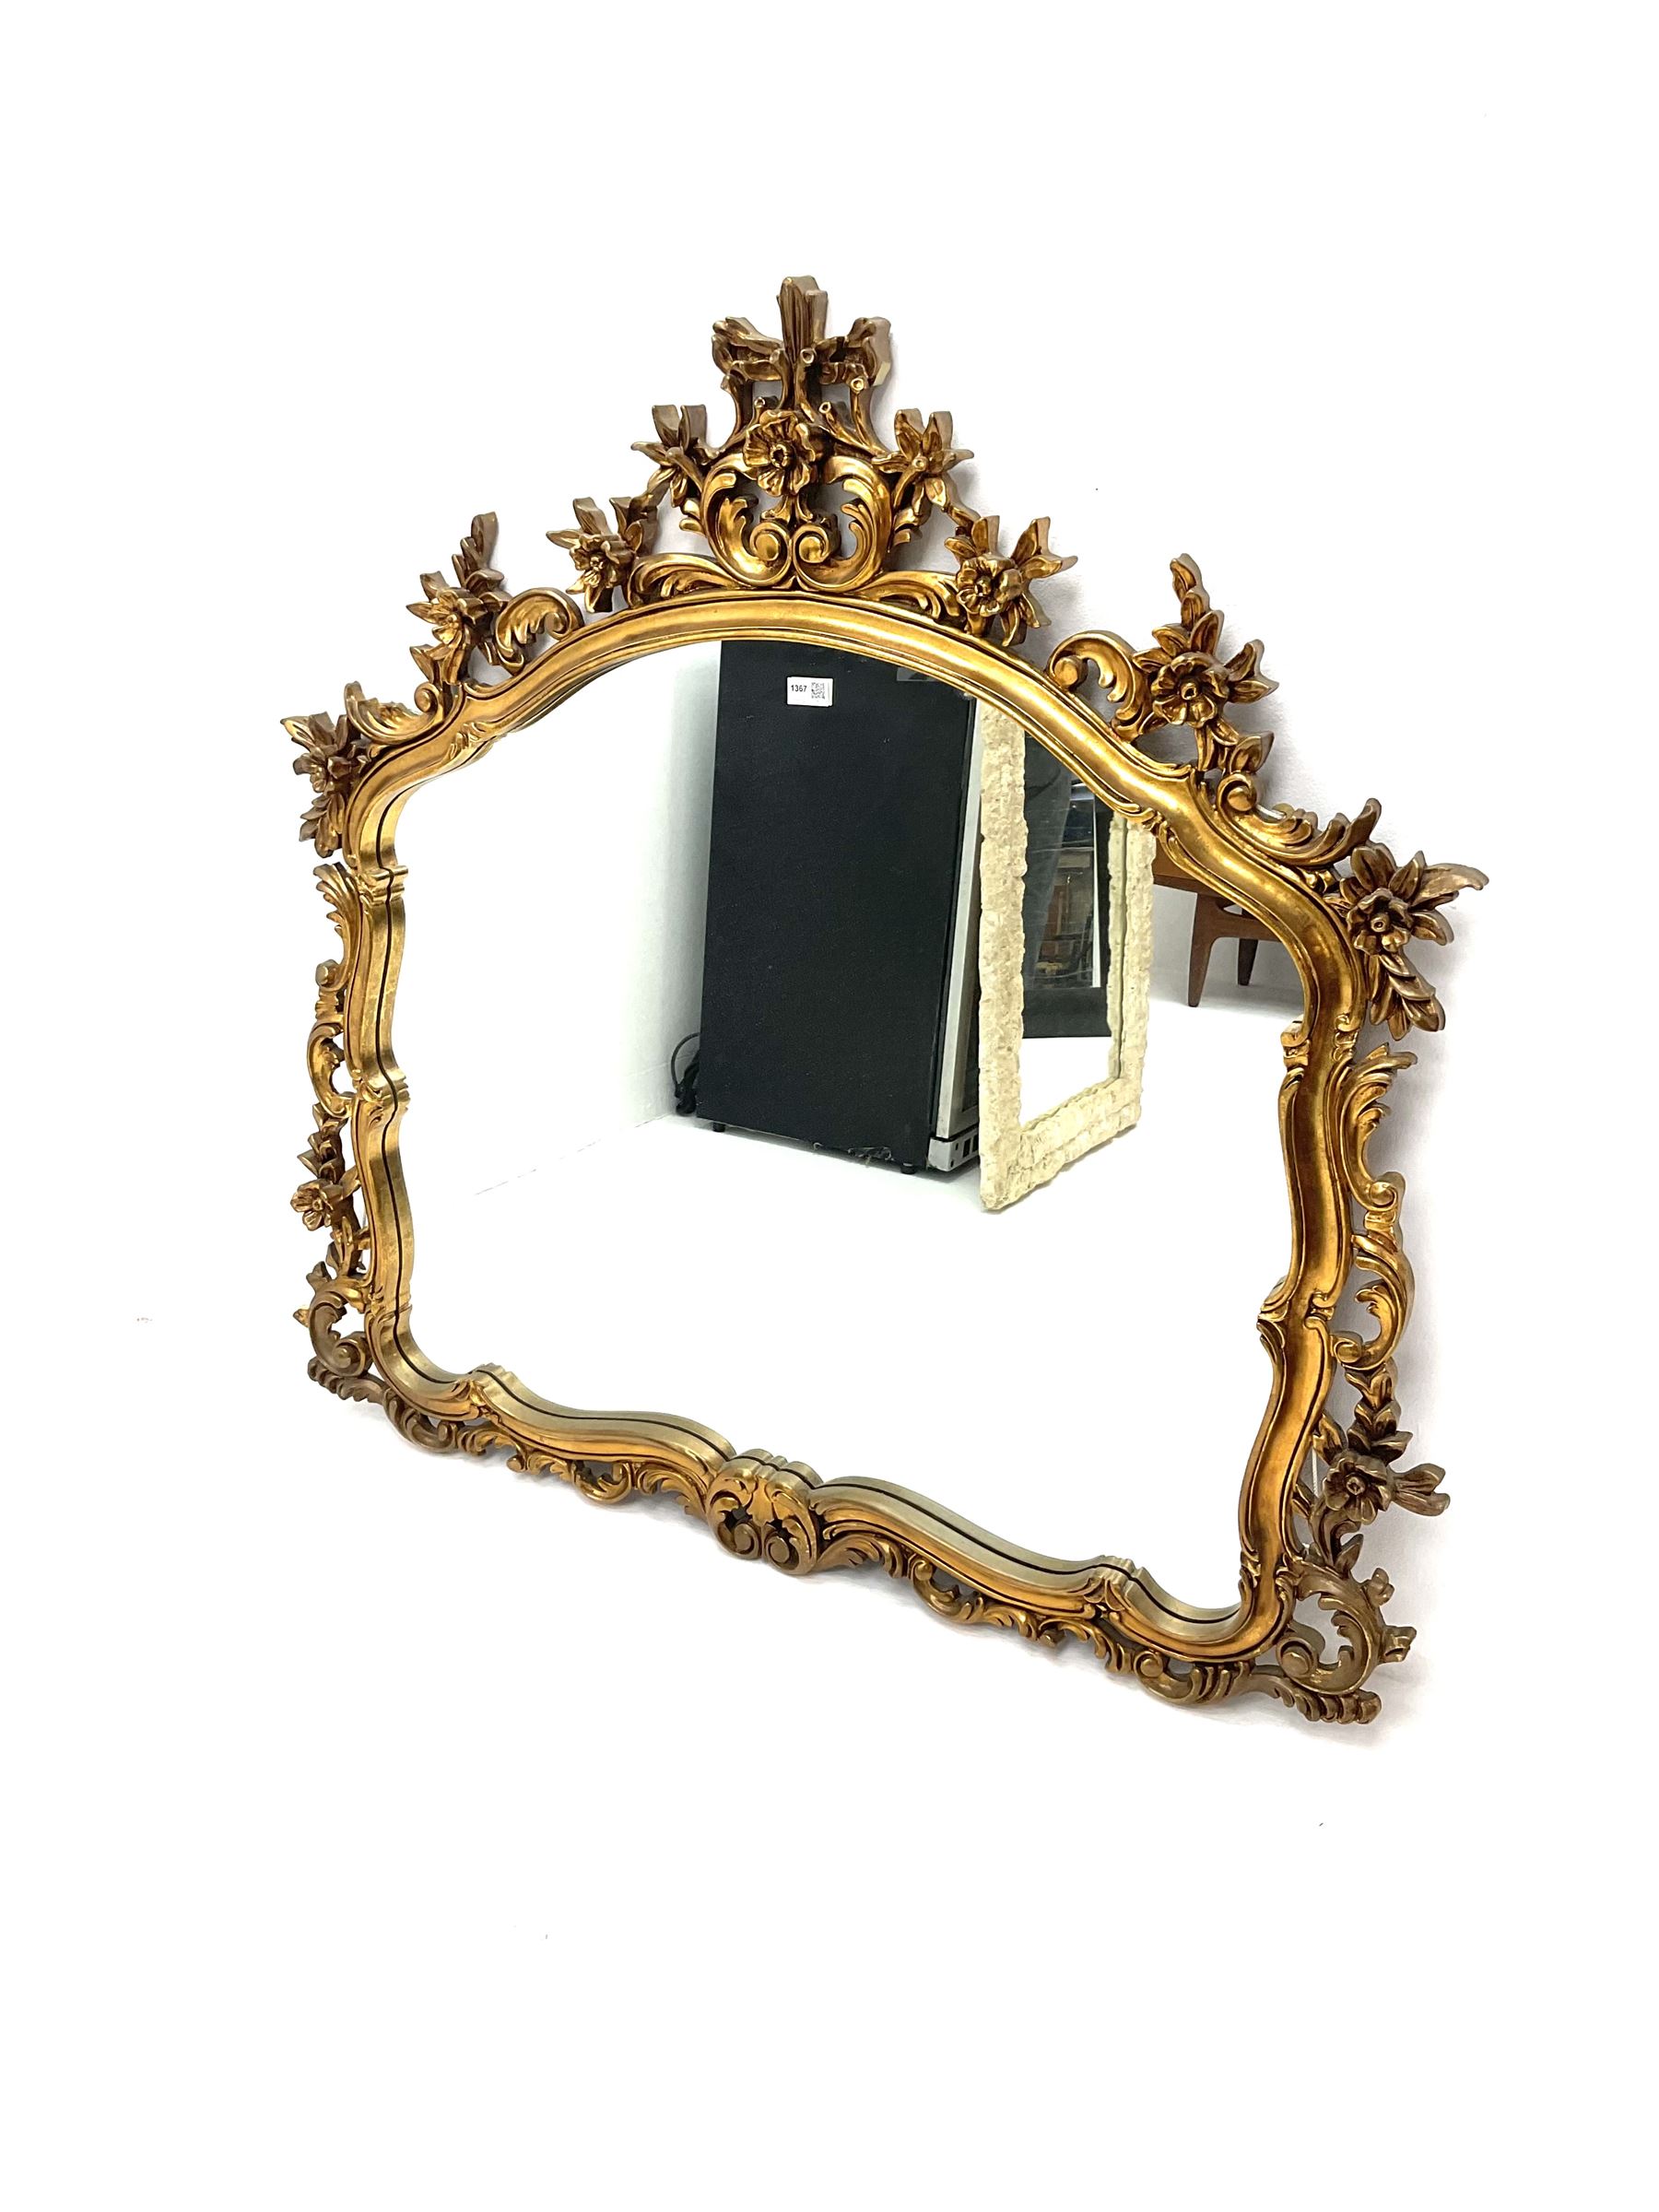 Chippendale style ornate gilt framed over mantle mirror - Image 3 of 3